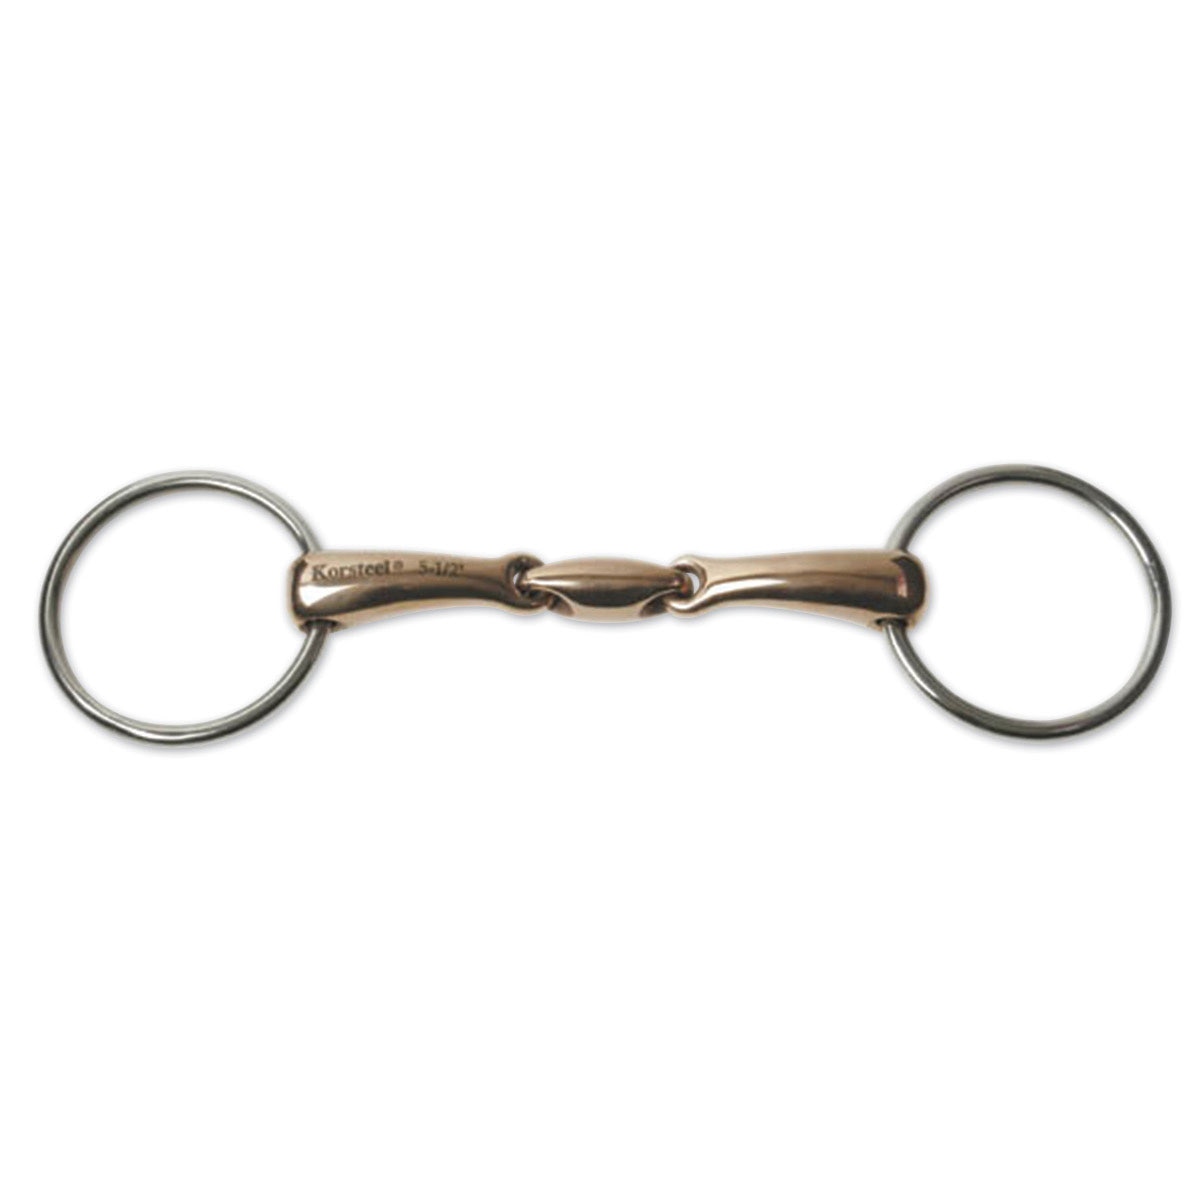 Thick Hollow Mouth Loose Ring Jointed Stainless Steel Snaffle Bit Size 6